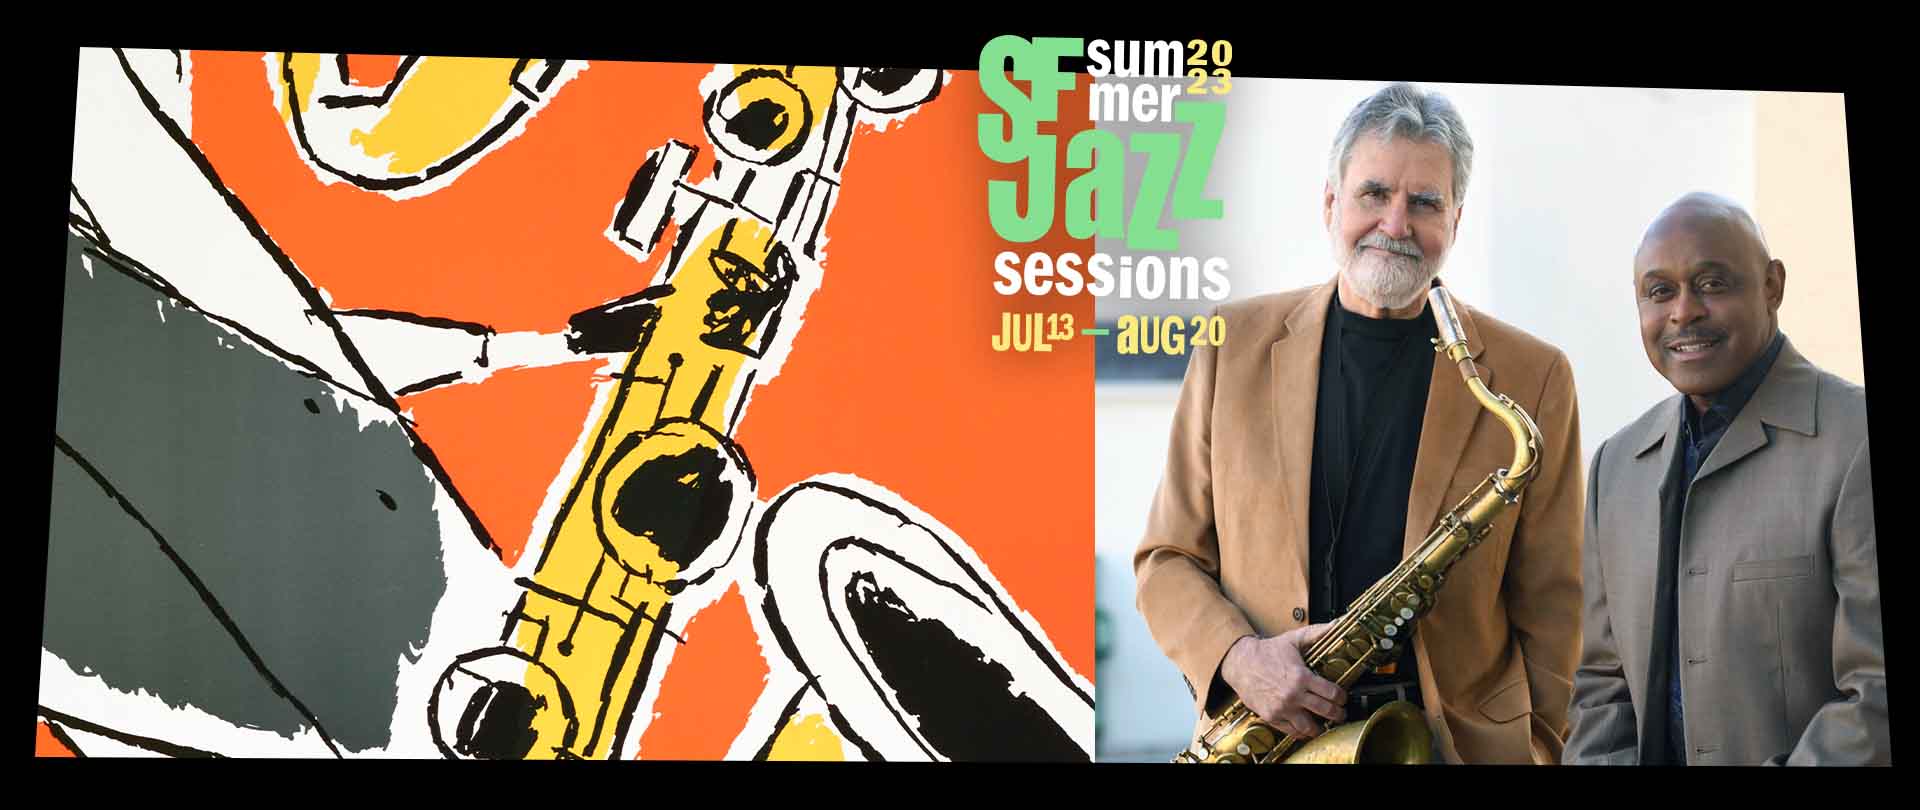 Michael O’Neill Sextet With the 2023 summer sessions logo